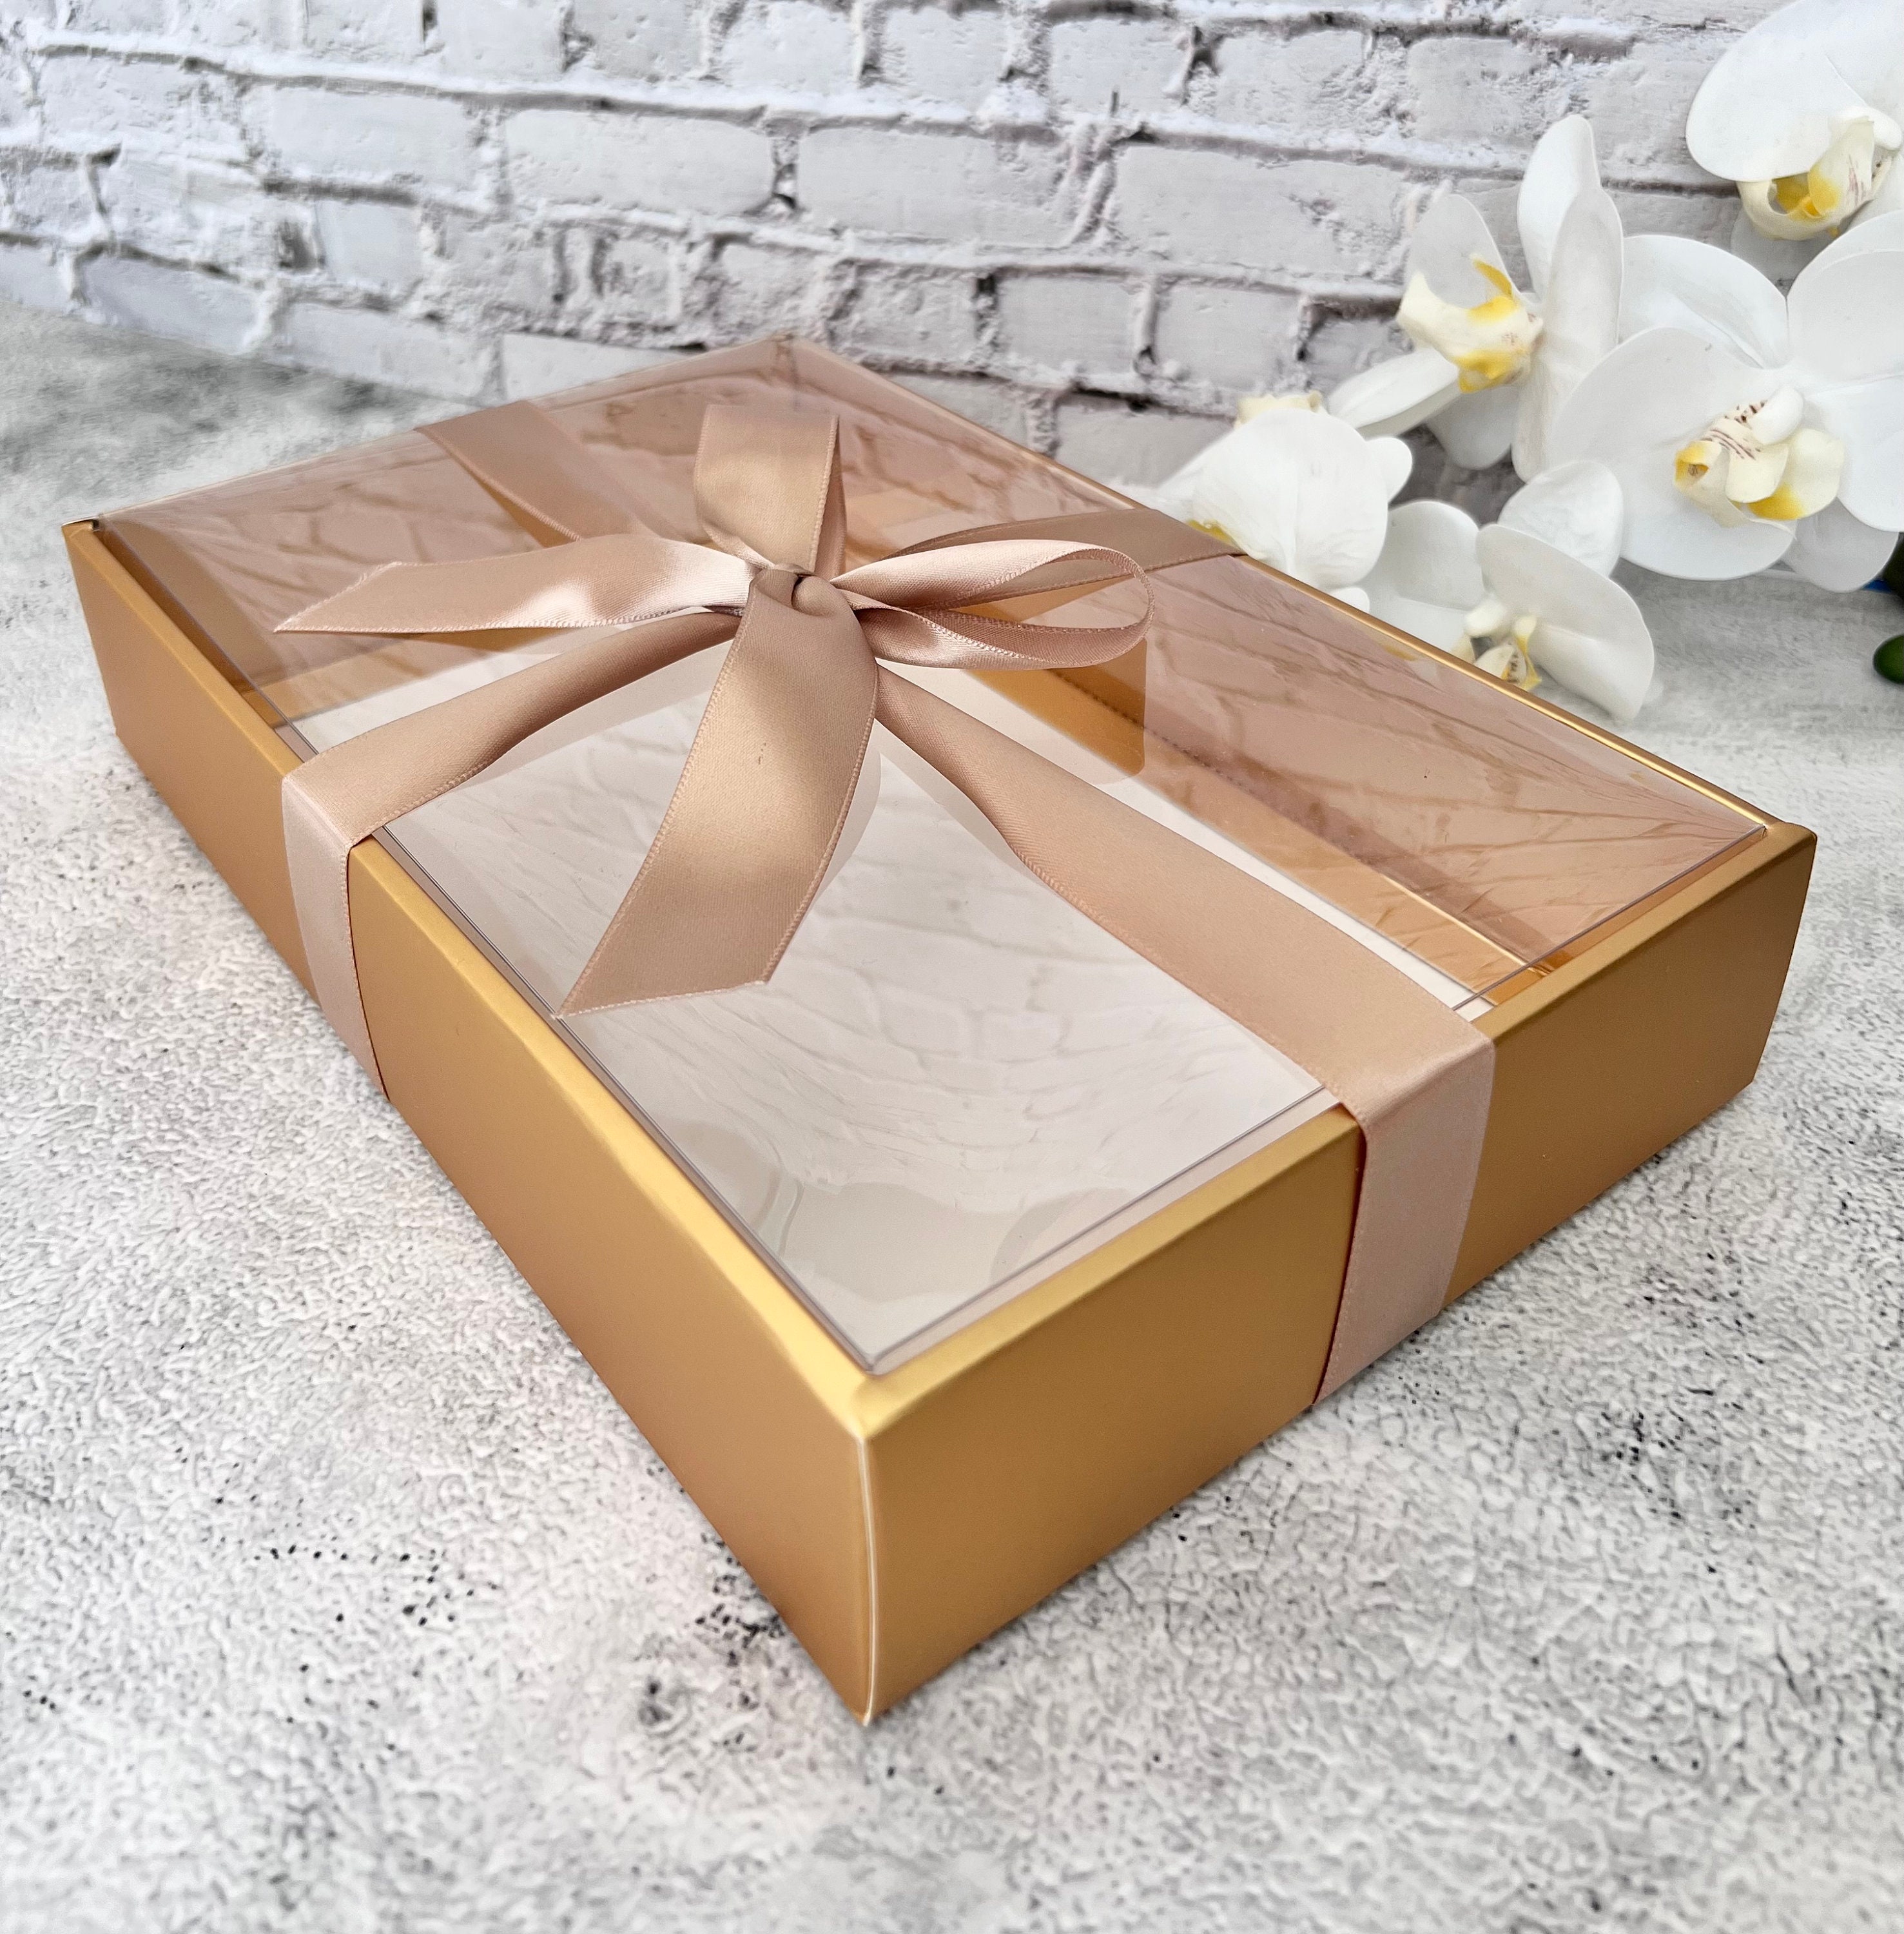 SagaSave 10pcs Square Boxes Clear Gifts Box DIY Wedding Party Gifts Package  Decorations Supplies